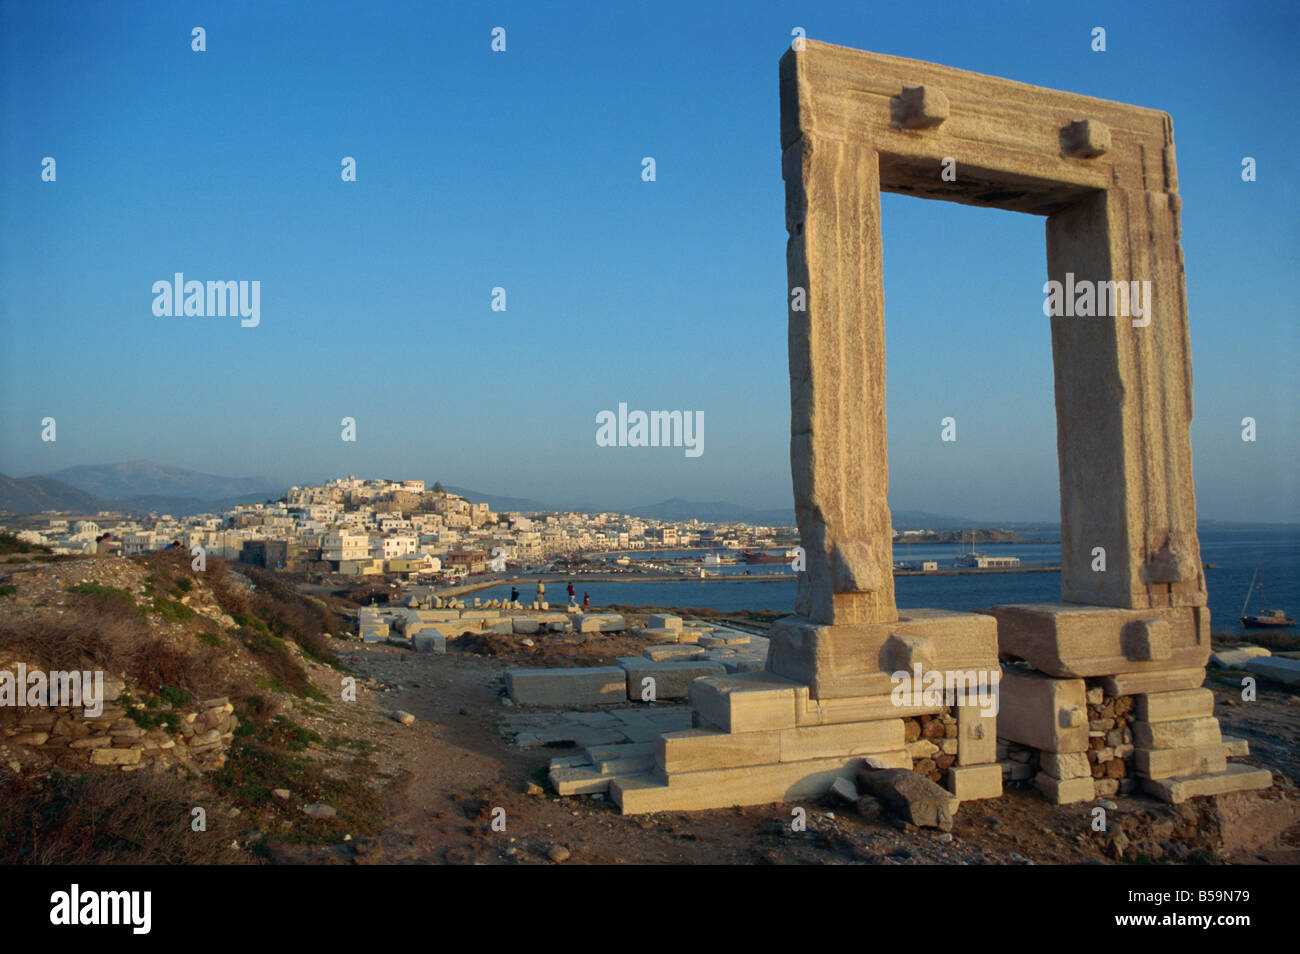 Roman arch at archaeological site with sea and village in the background, on Naxos, Cyclades Islands, Greek Islands, Greece Stock Photo